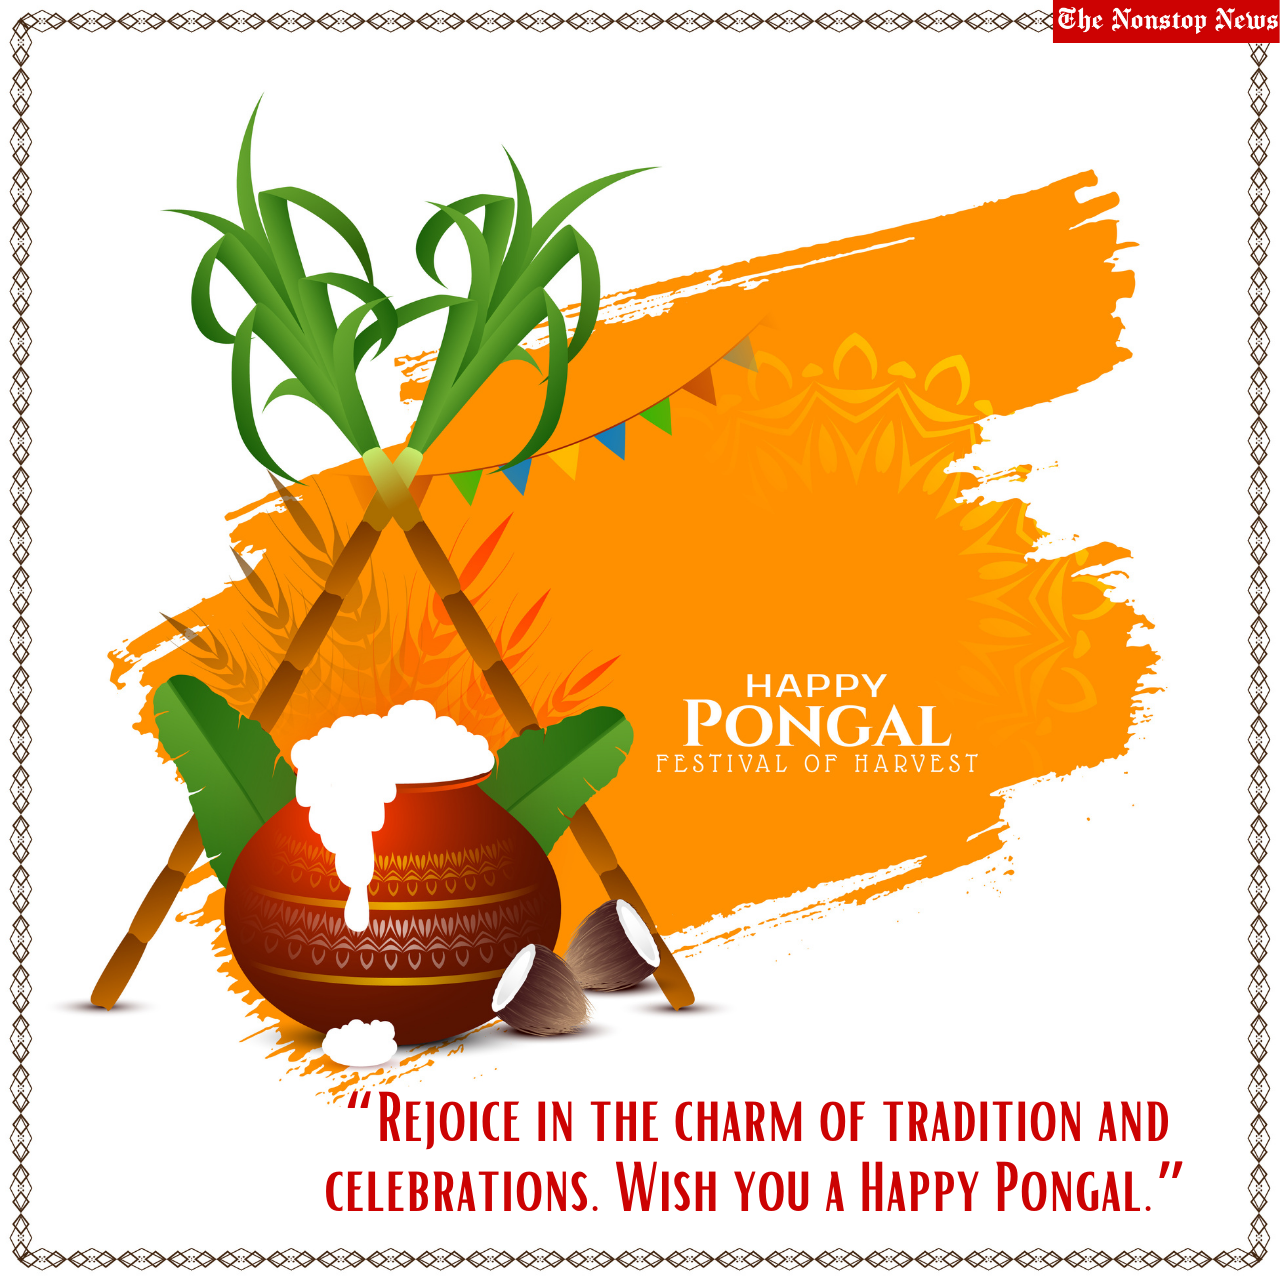 Pongal 2022 Wishes, Quotes, HD Images, Messages, Sayings, Greetings to share